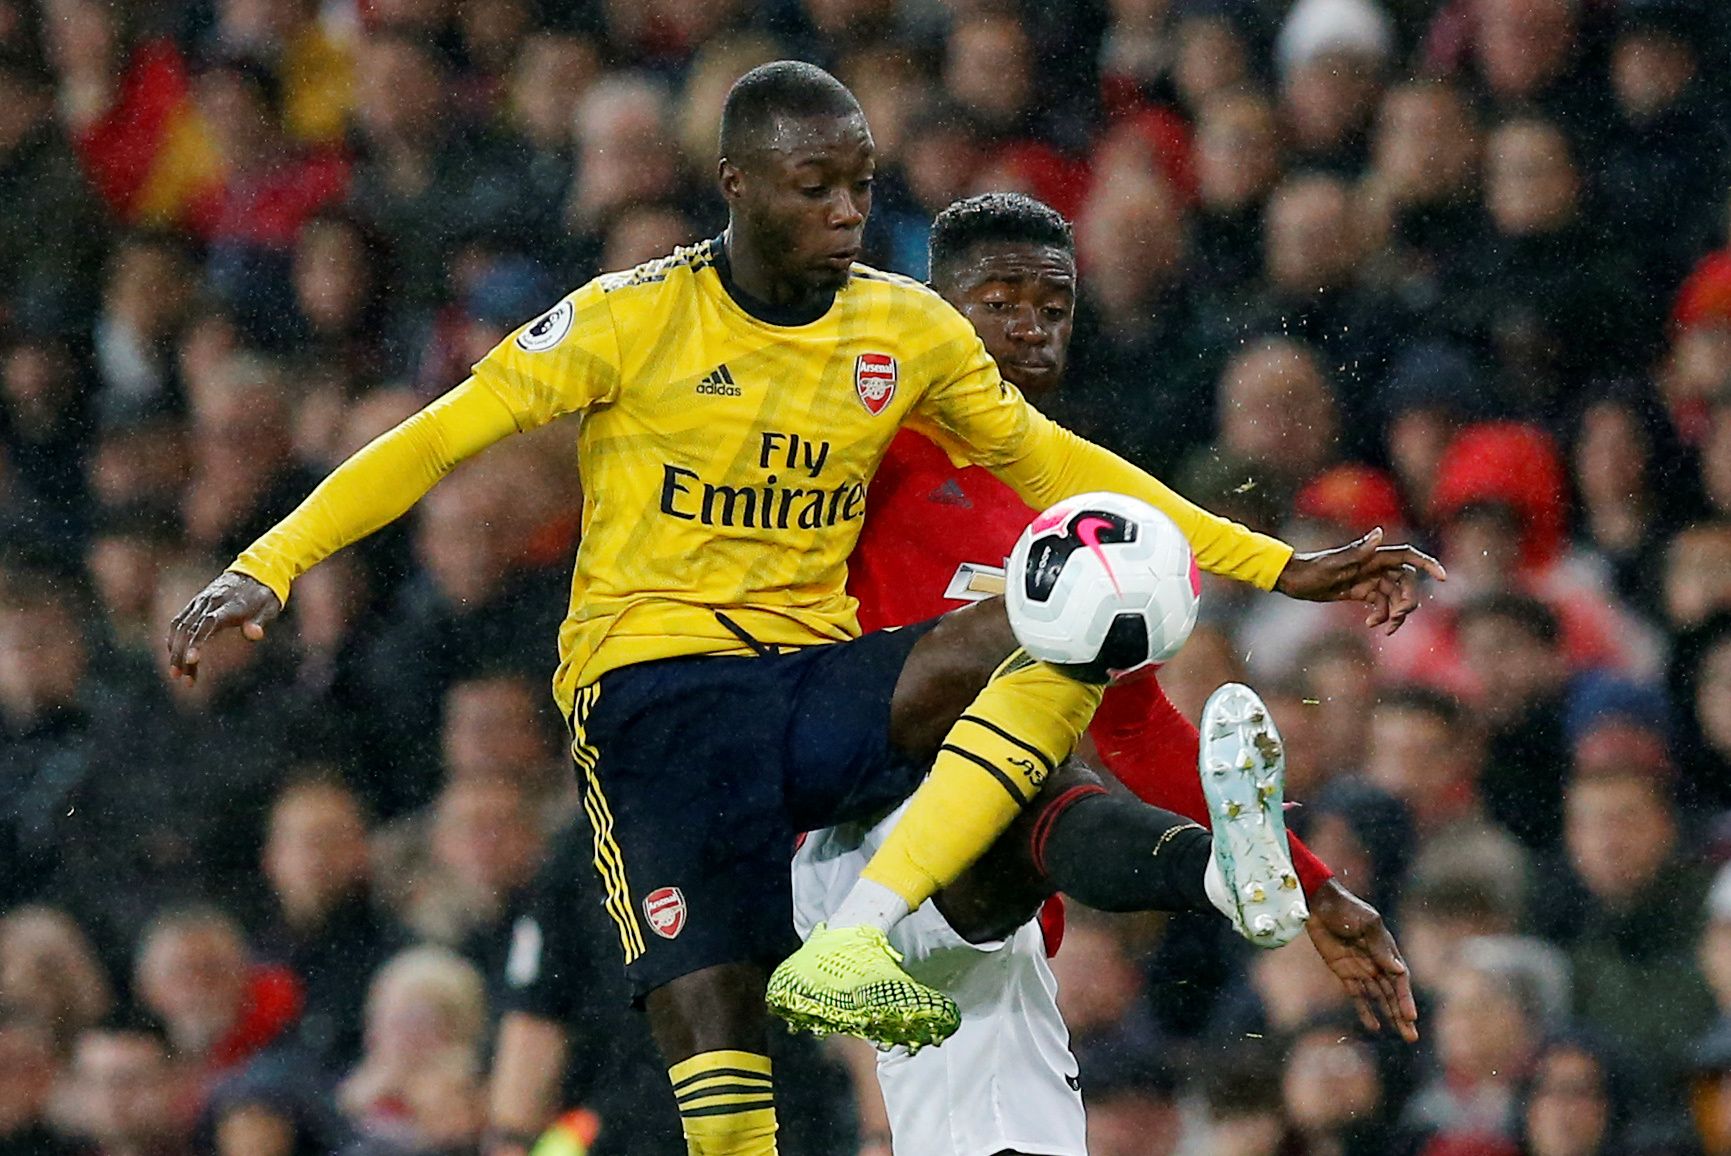 Soccer Football - Premier League - Manchester United v Arsenal - Old Trafford, Manchester, Britain - September 30, 2019   Arsenal's Nicolas Pepe in action    REUTERS/Andrew Yates    EDITORIAL USE ONLY. No use with unauthorized audio, video, data, fixture lists, club/league logos or 